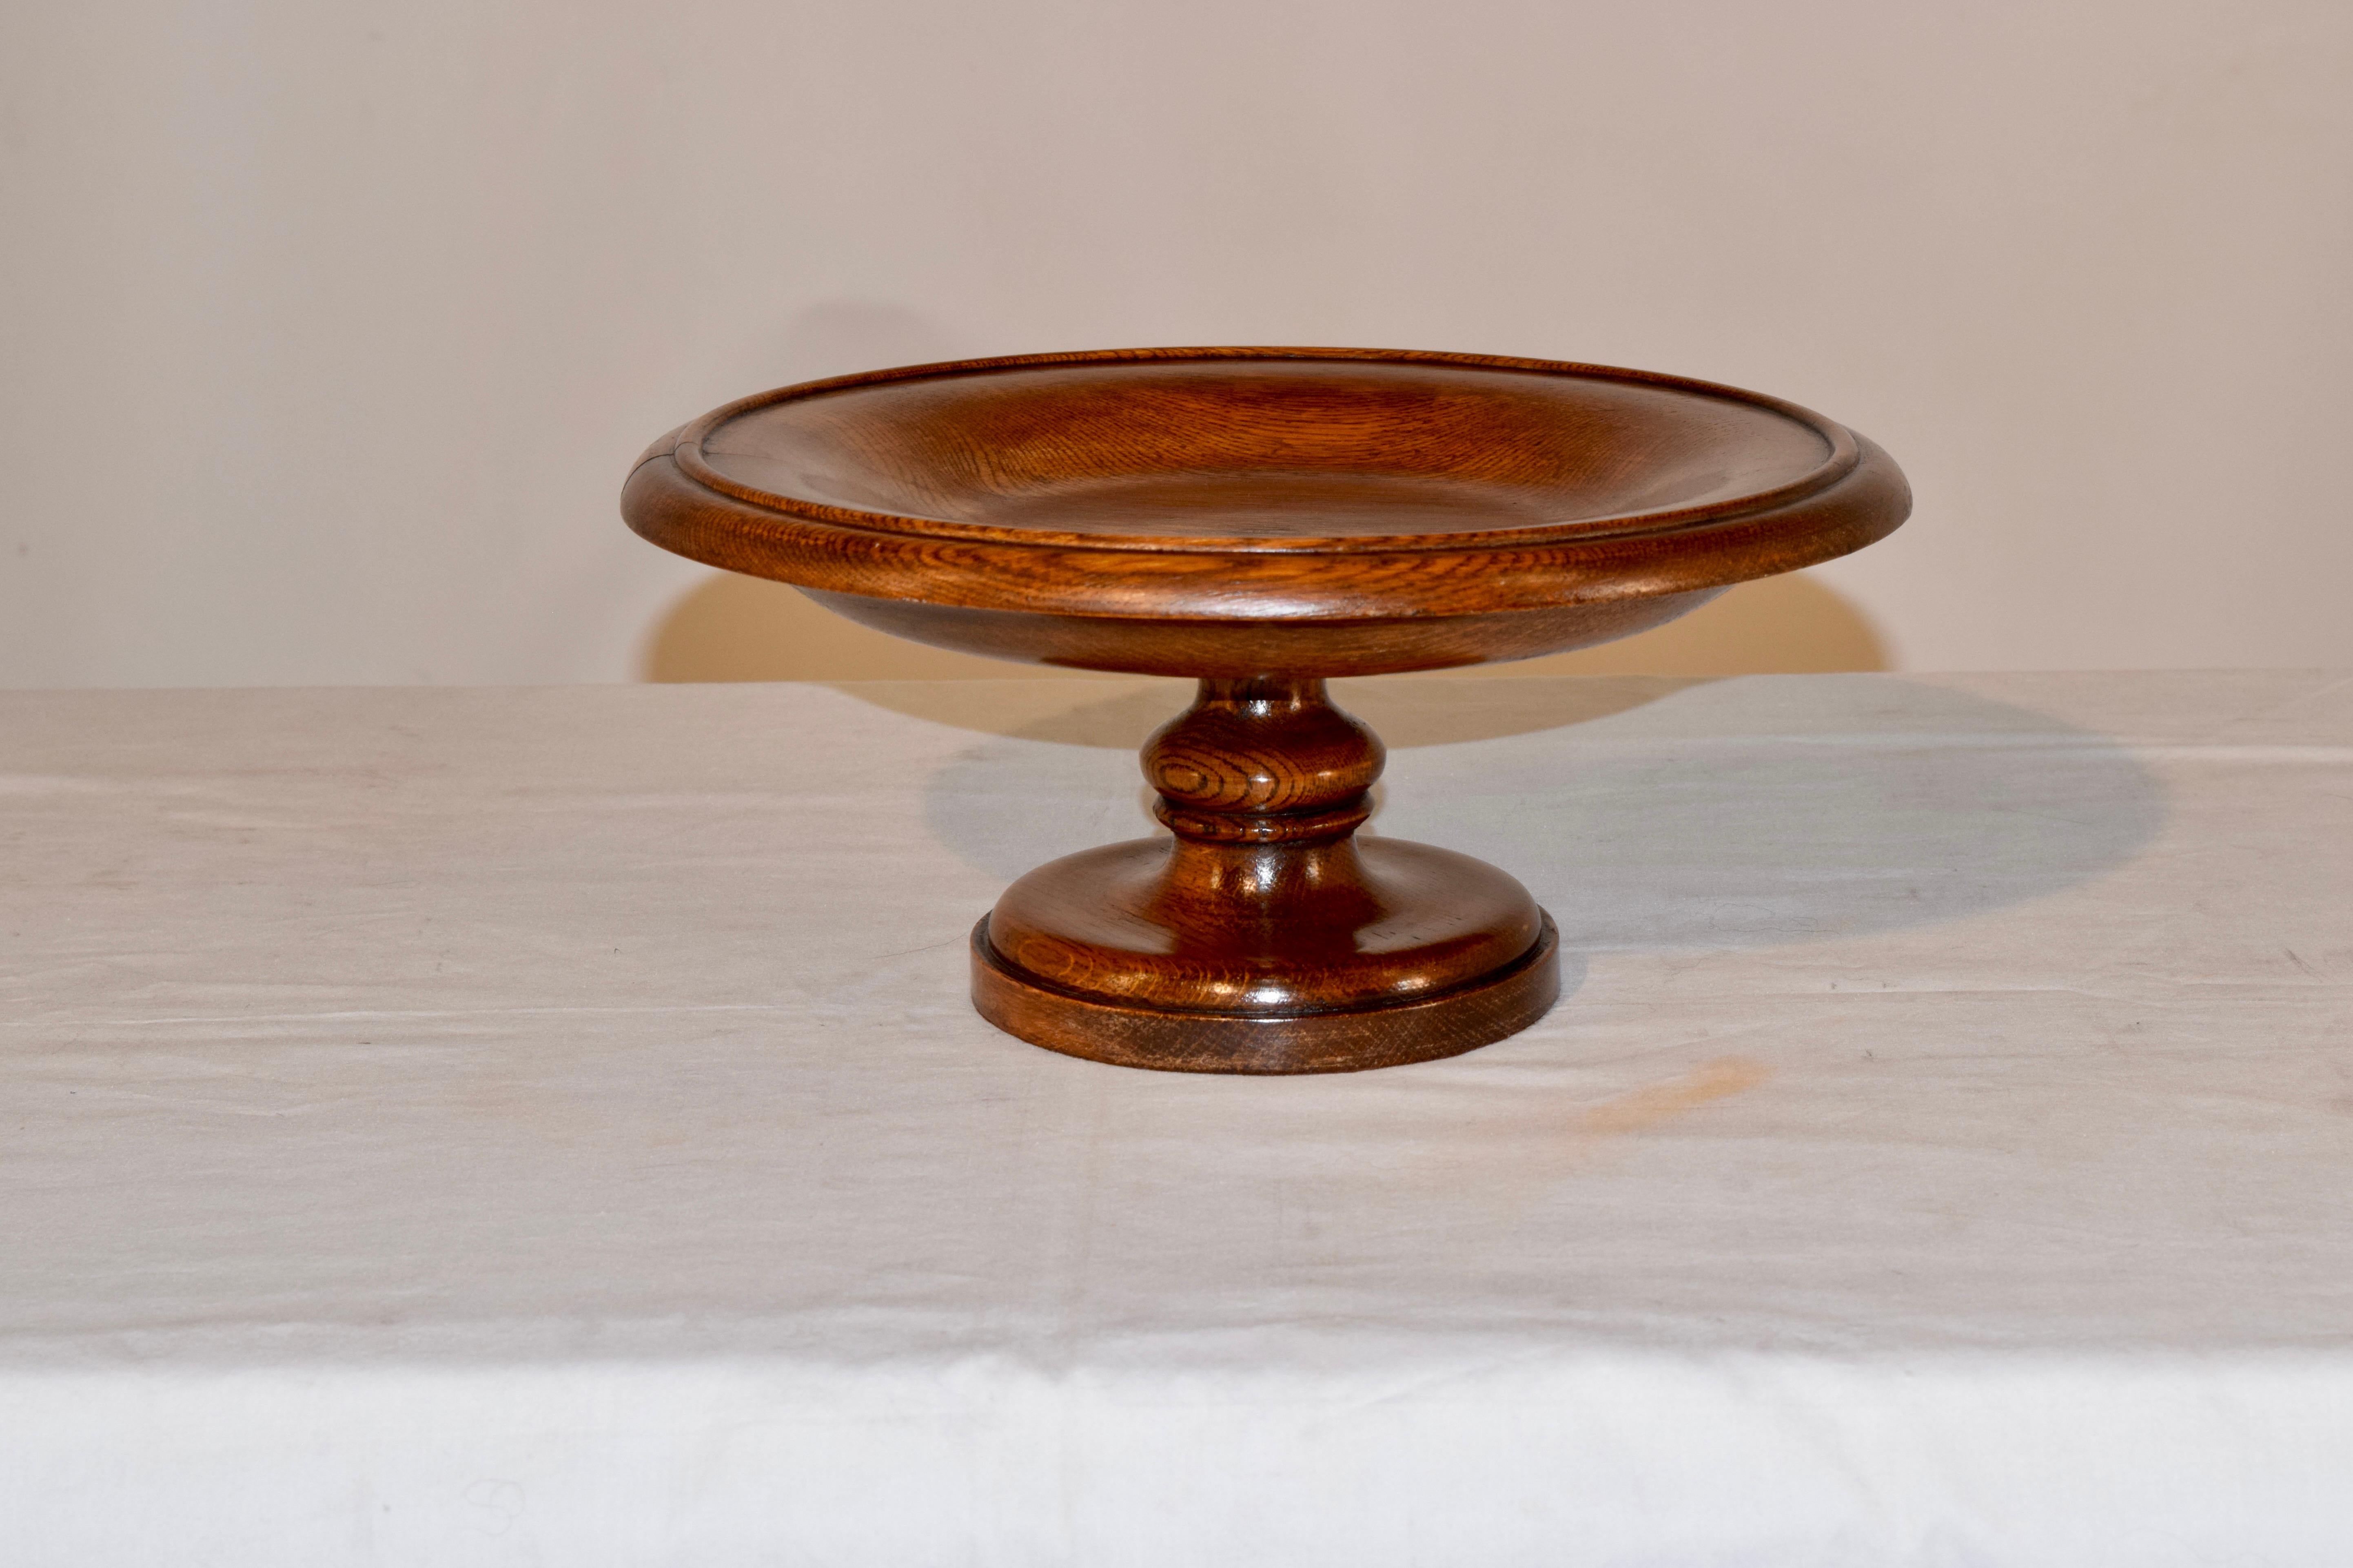 Late 19th century oak hand turned compote from England with a lovely bowl atop a turned pedestal and supported on a hand turned base.